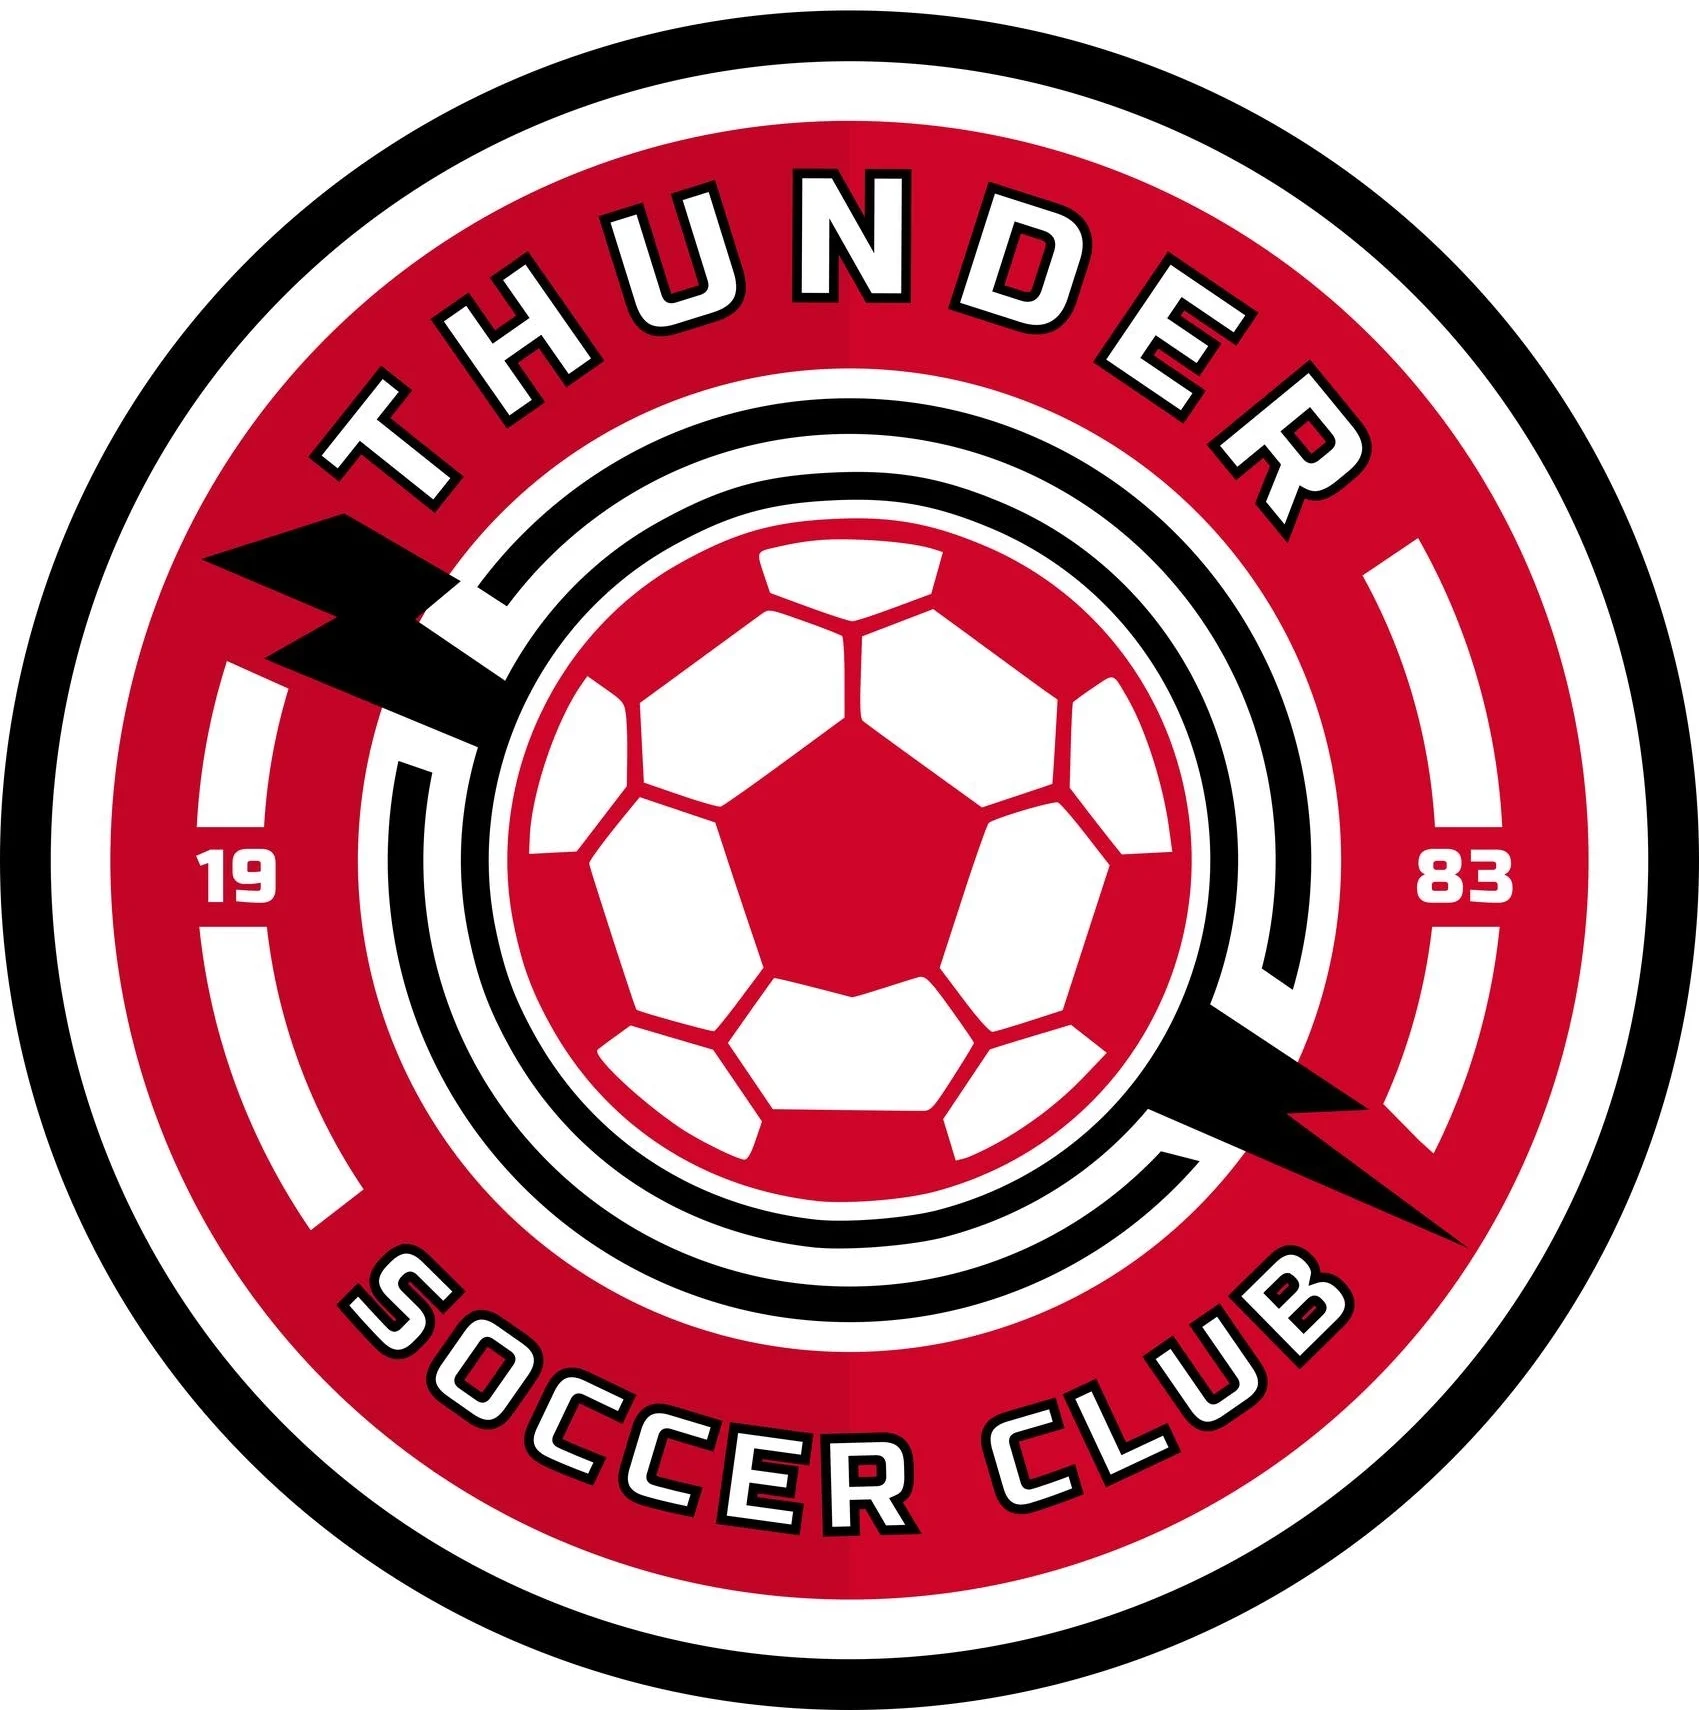 thunder soccer club logo is a great example of a youth sports logo